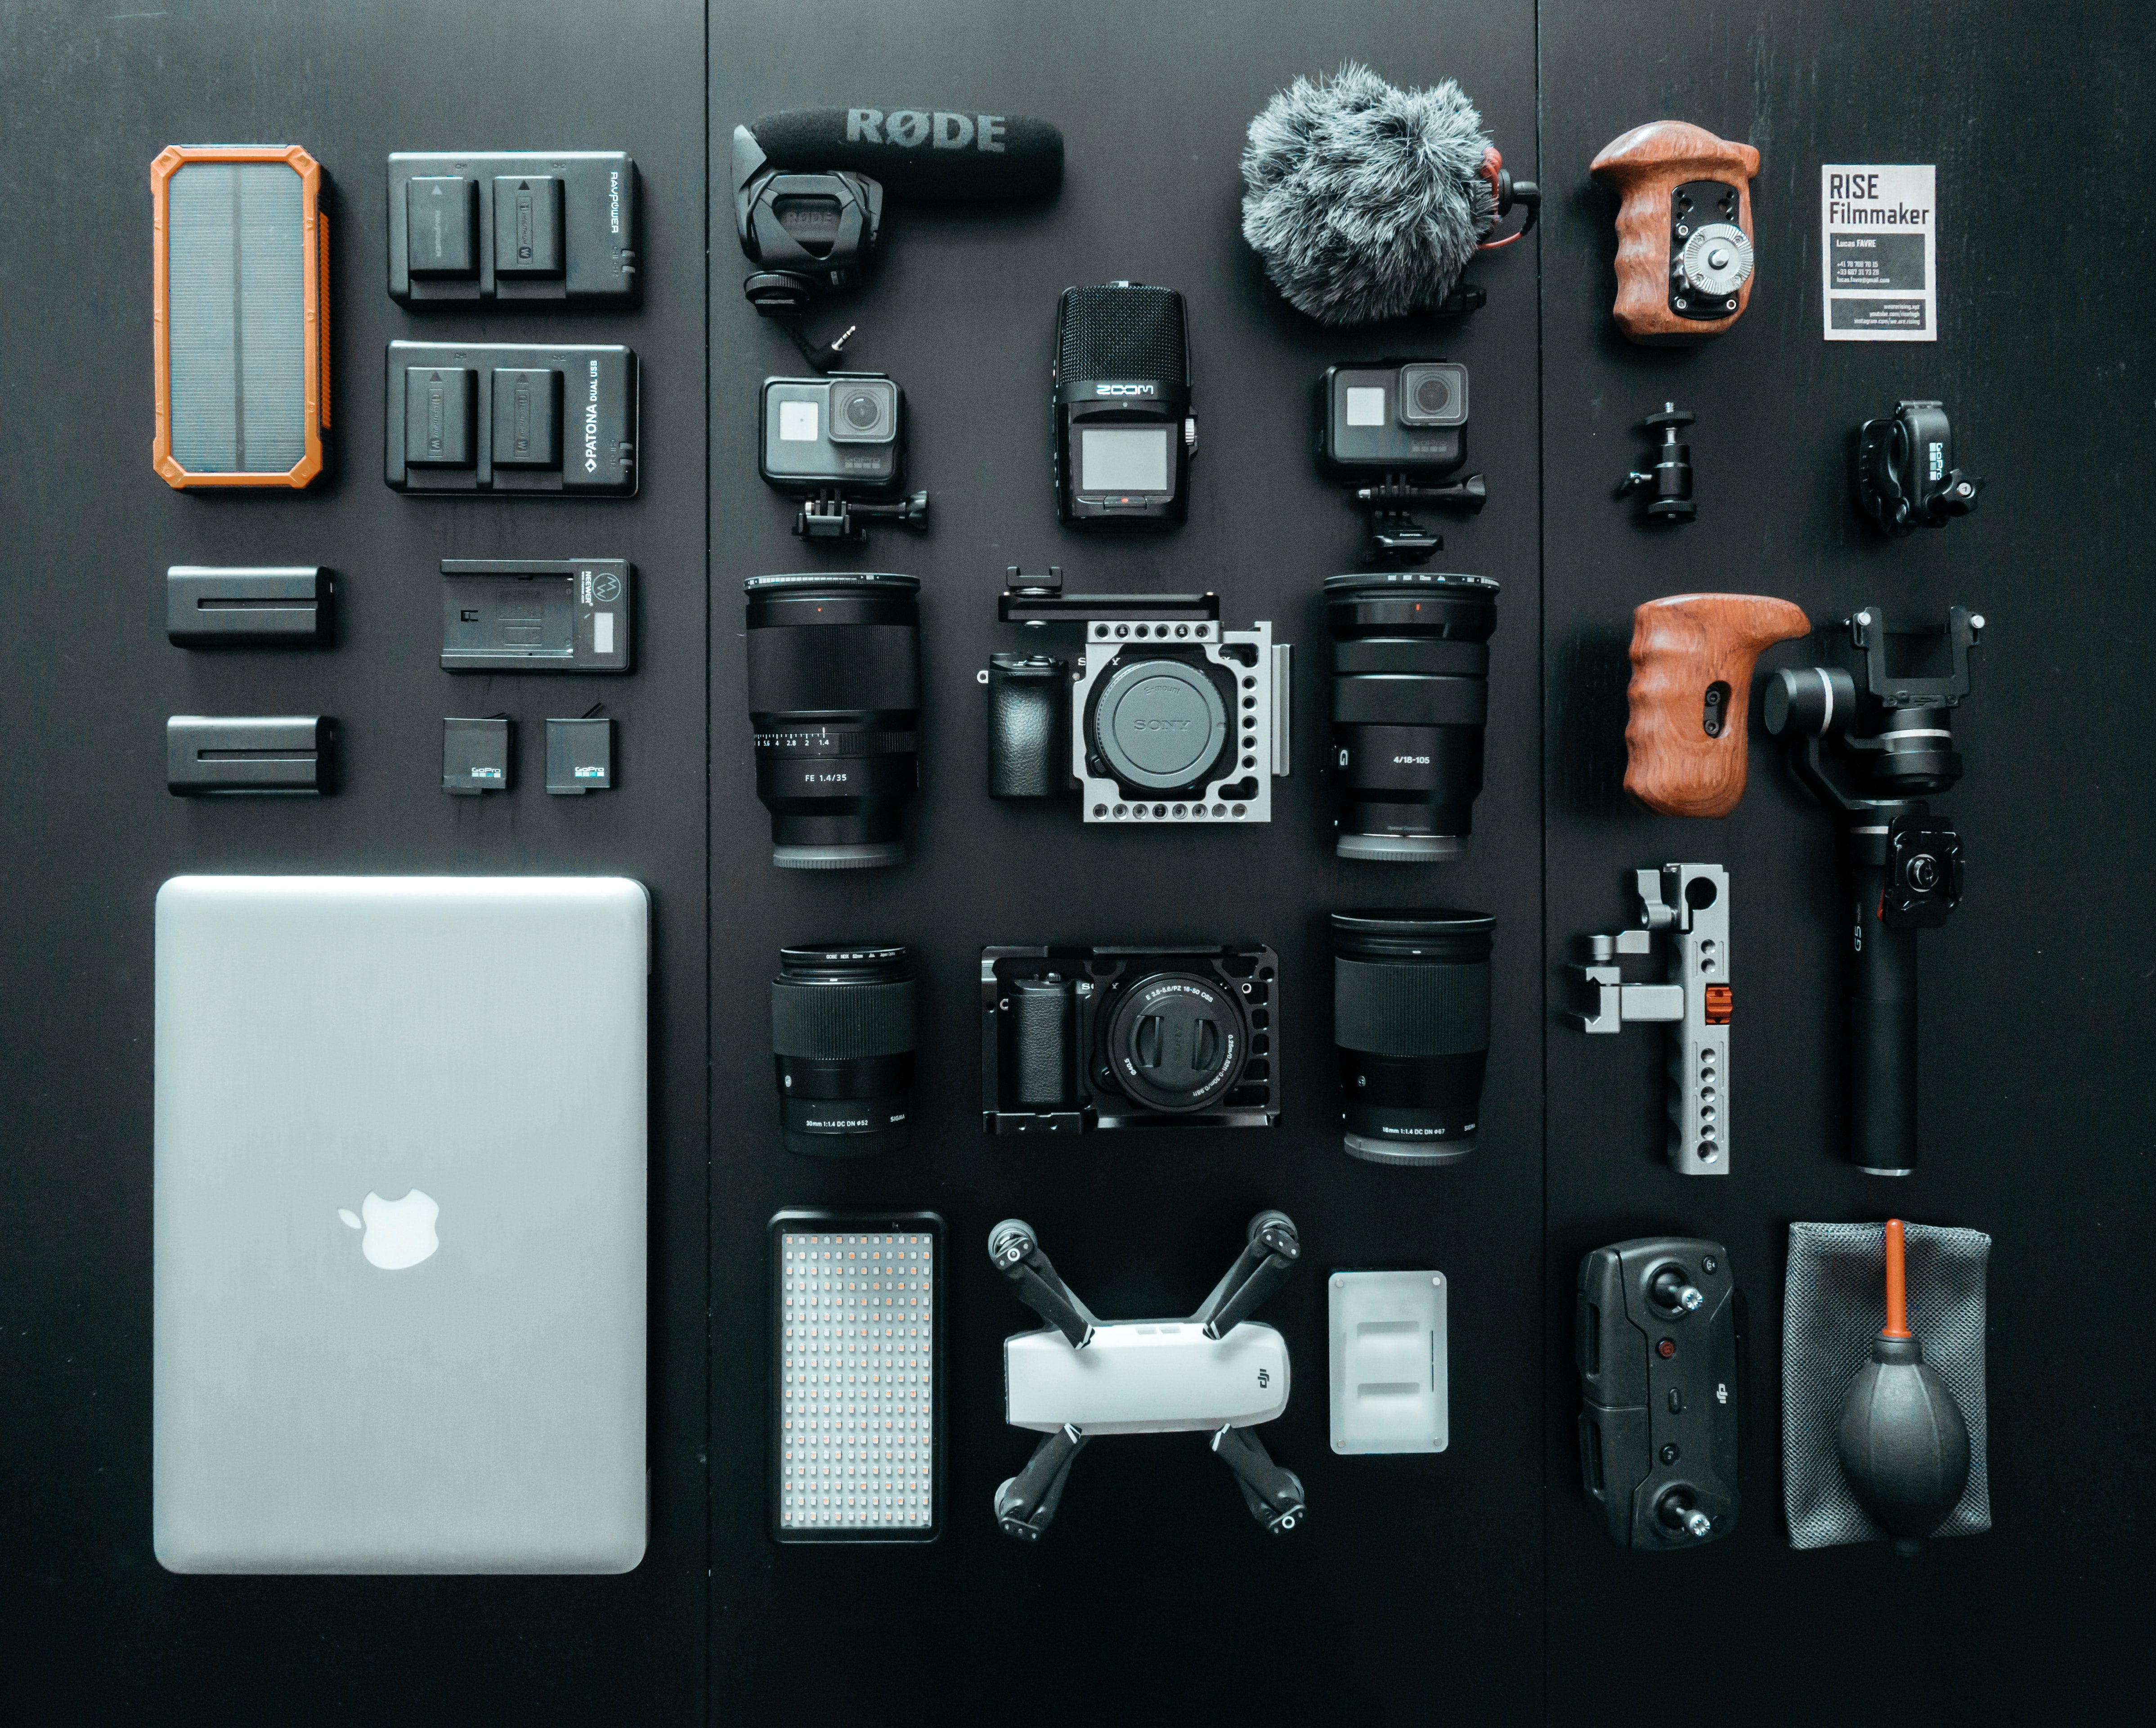 This a is a variety of equipment used by Essex drones, incluing Mac laptops, gimbals, battery packs, mics and multi lenses.